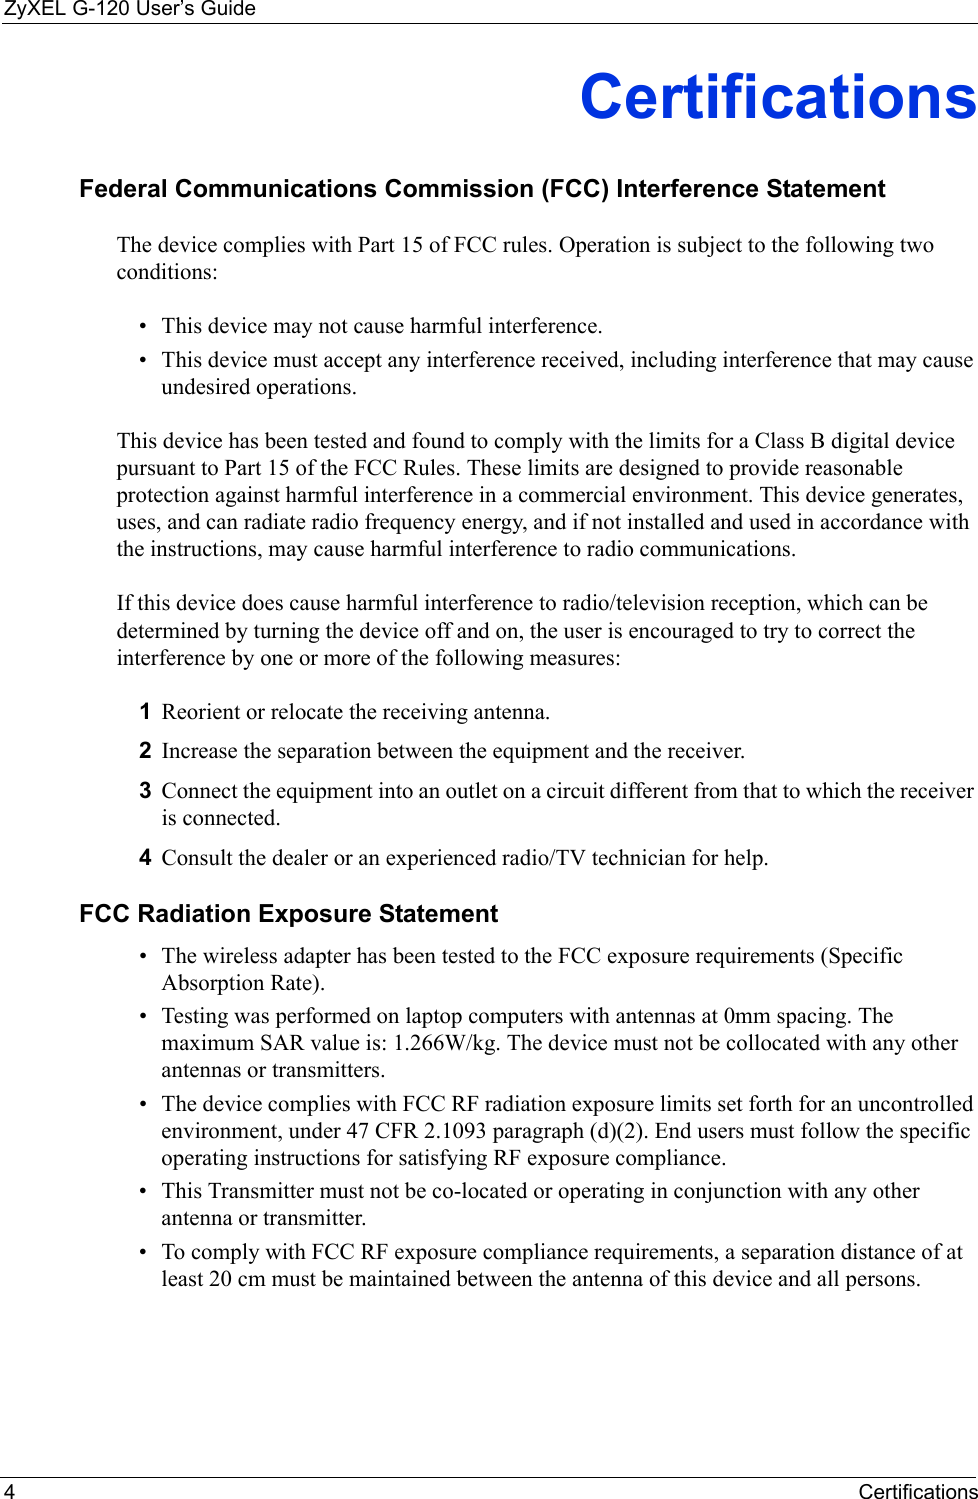 ZyXEL G-120 User’s Guide4CertificationsCertificationsFederal Communications Commission (FCC) Interference StatementThe device complies with Part 15 of FCC rules. Operation is subject to the following two conditions:• This device may not cause harmful interference.• This device must accept any interference received, including interference that may cause undesired operations.This device has been tested and found to comply with the limits for a Class B digital device pursuant to Part 15 of the FCC Rules. These limits are designed to provide reasonable protection against harmful interference in a commercial environment. This device generates, uses, and can radiate radio frequency energy, and if not installed and used in accordance with the instructions, may cause harmful interference to radio communications.If this device does cause harmful interference to radio/television reception, which can be determined by turning the device off and on, the user is encouraged to try to correct the interference by one or more of the following measures:1Reorient or relocate the receiving antenna.2Increase the separation between the equipment and the receiver.3Connect the equipment into an outlet on a circuit different from that to which the receiver is connected.4Consult the dealer or an experienced radio/TV technician for help.FCC Radiation Exposure Statement• The wireless adapter has been tested to the FCC exposure requirements (Specific Absorption Rate). • Testing was performed on laptop computers with antennas at 0mm spacing. The maximum SAR value is: 1.266W/kg. The device must not be collocated with any other antennas or transmitters.• The device complies with FCC RF radiation exposure limits set forth for an uncontrolled environment, under 47 CFR 2.1093 paragraph (d)(2). End users must follow the specific operating instructions for satisfying RF exposure compliance. • This Transmitter must not be co-located or operating in conjunction with any other antenna or transmitter.• To comply with FCC RF exposure compliance requirements, a separation distance of at least 20 cm must be maintained between the antenna of this device and all persons. 